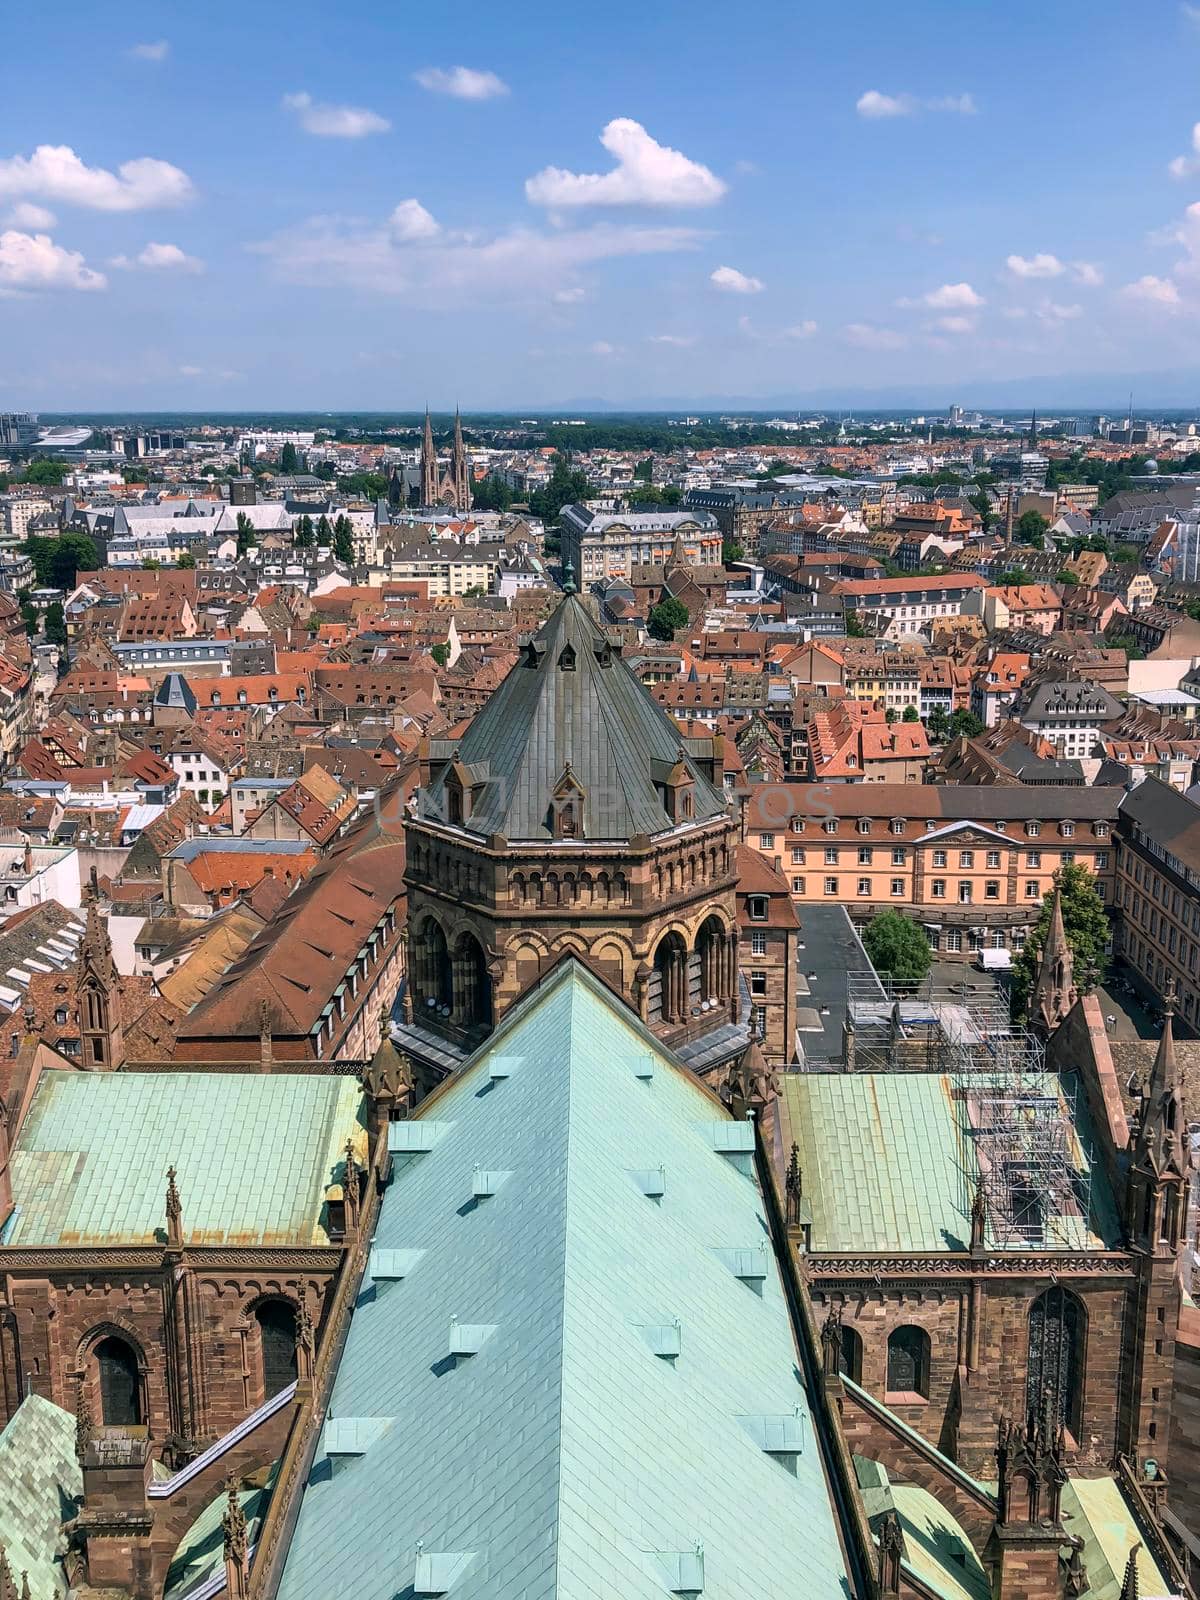 Strasbourg - Cathedral Notre-Dame - stock photo by kaliaevaen